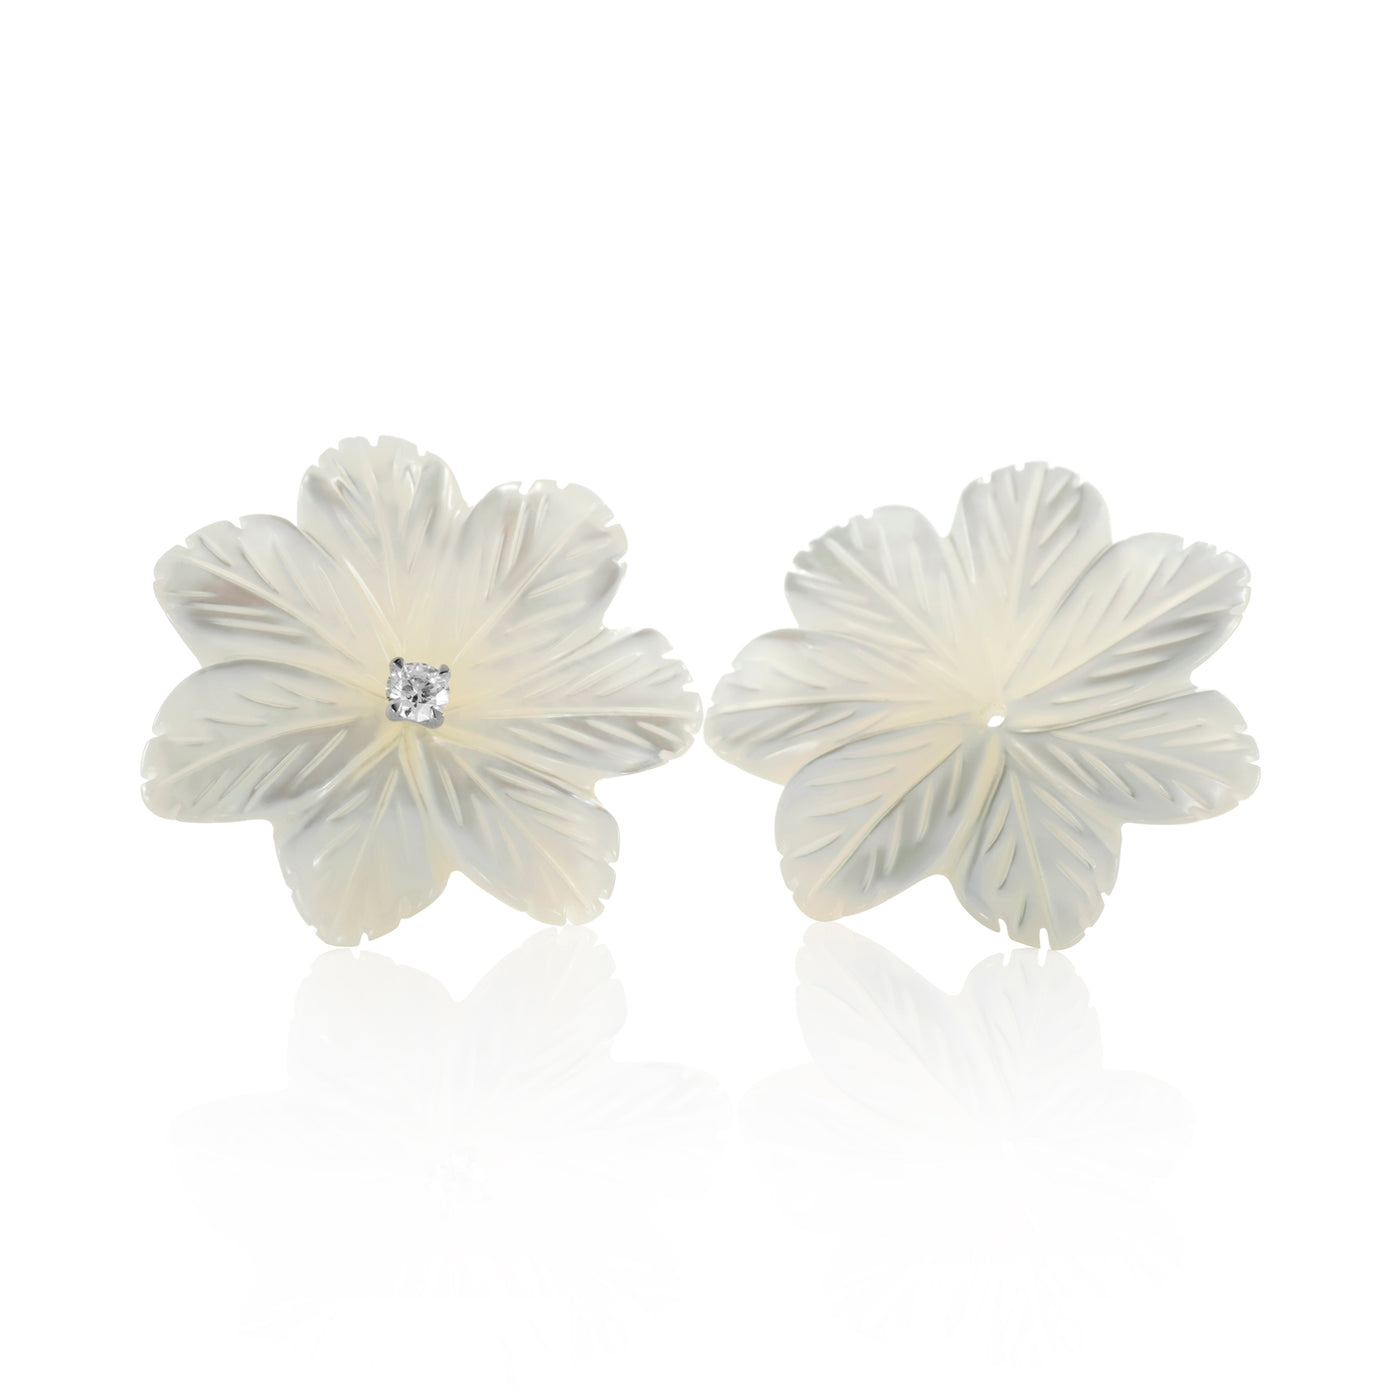 Precious flowers * Mother of pearl 7 leaves 24 mm